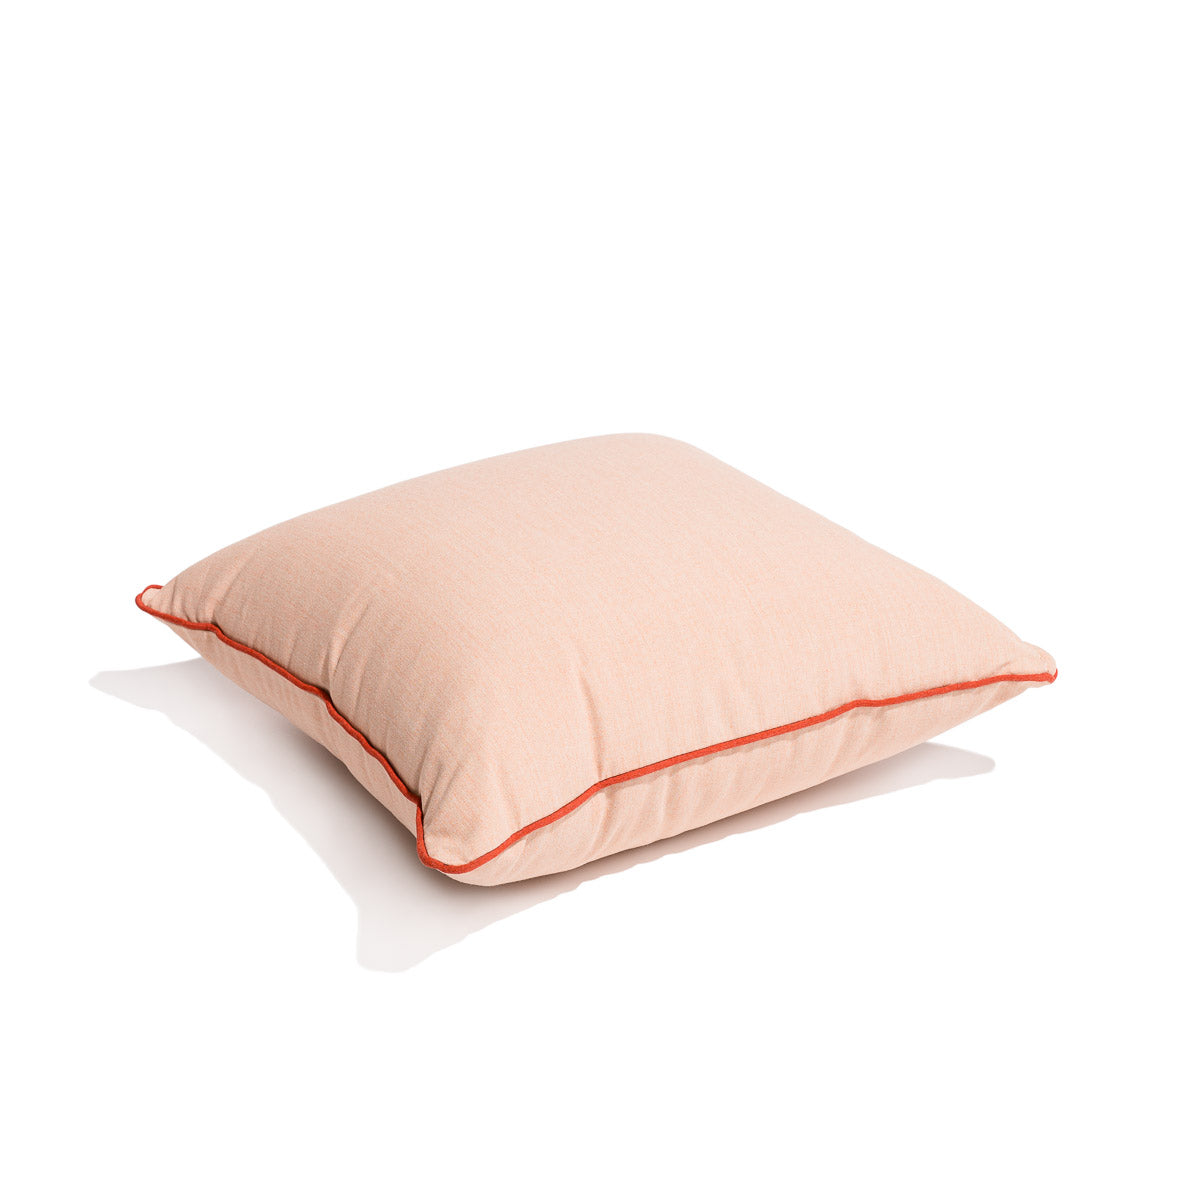 The Small Square Throw Pillow - Rivie Pink